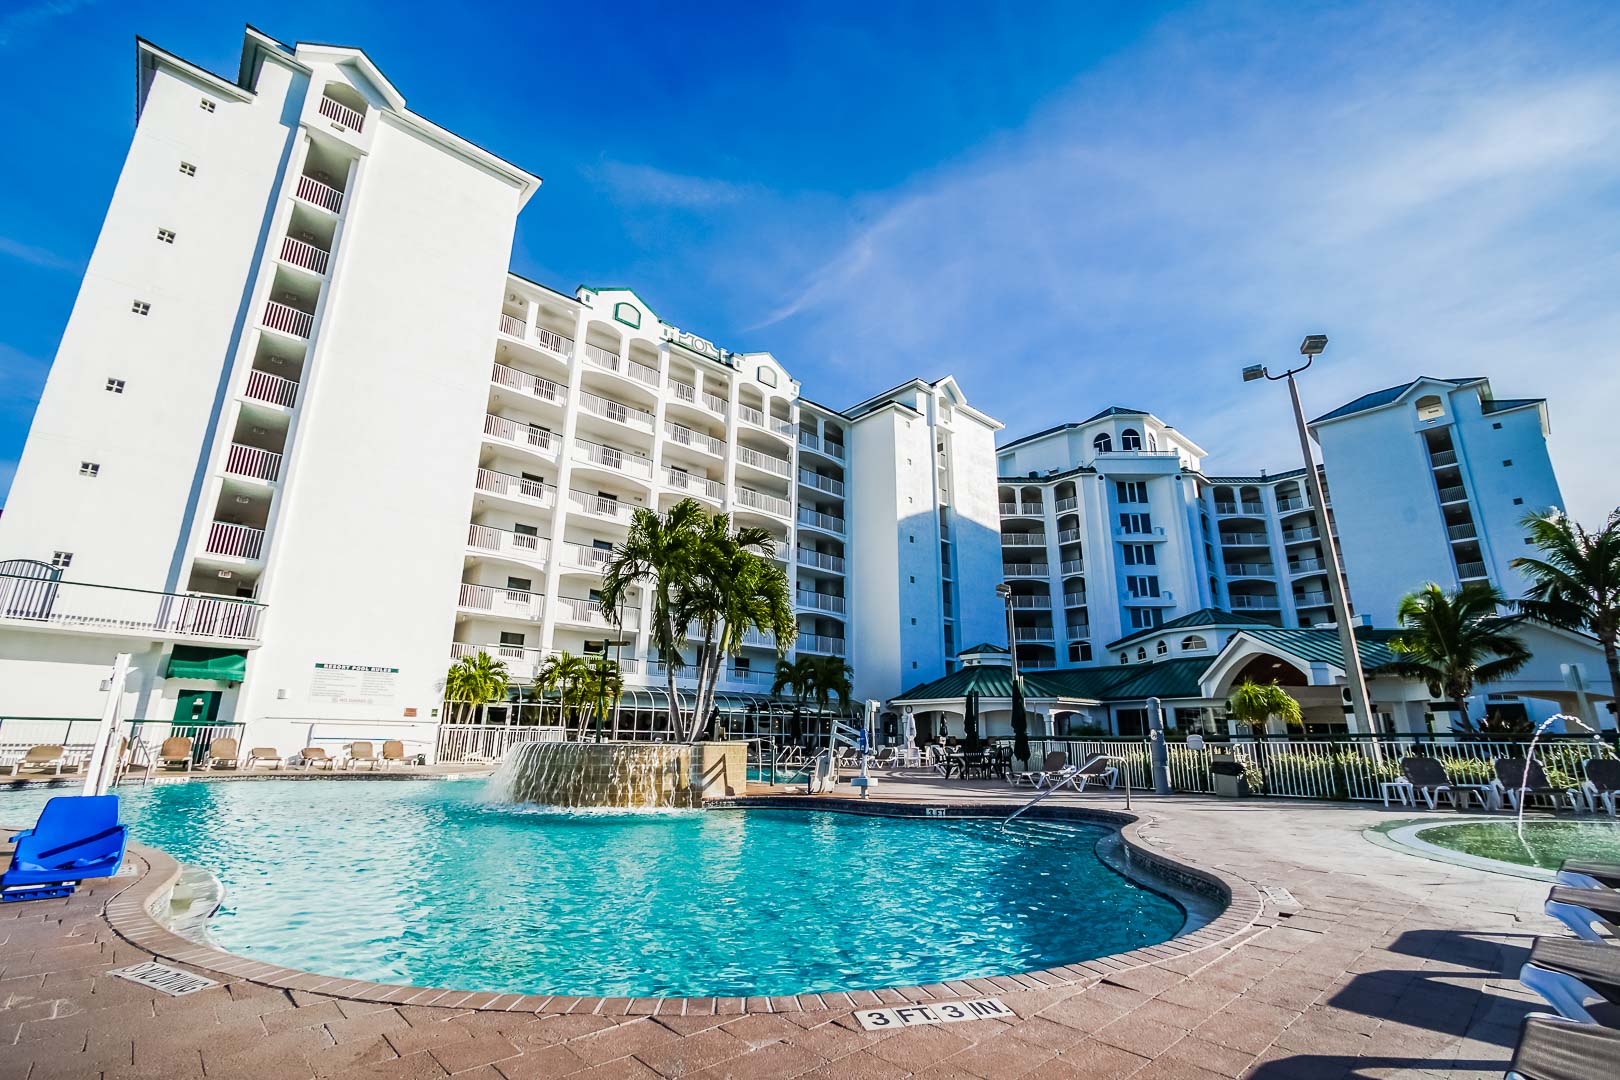 A stoic resort view with a pool at VRI's The Resort on Cocoa Beach in Florida.